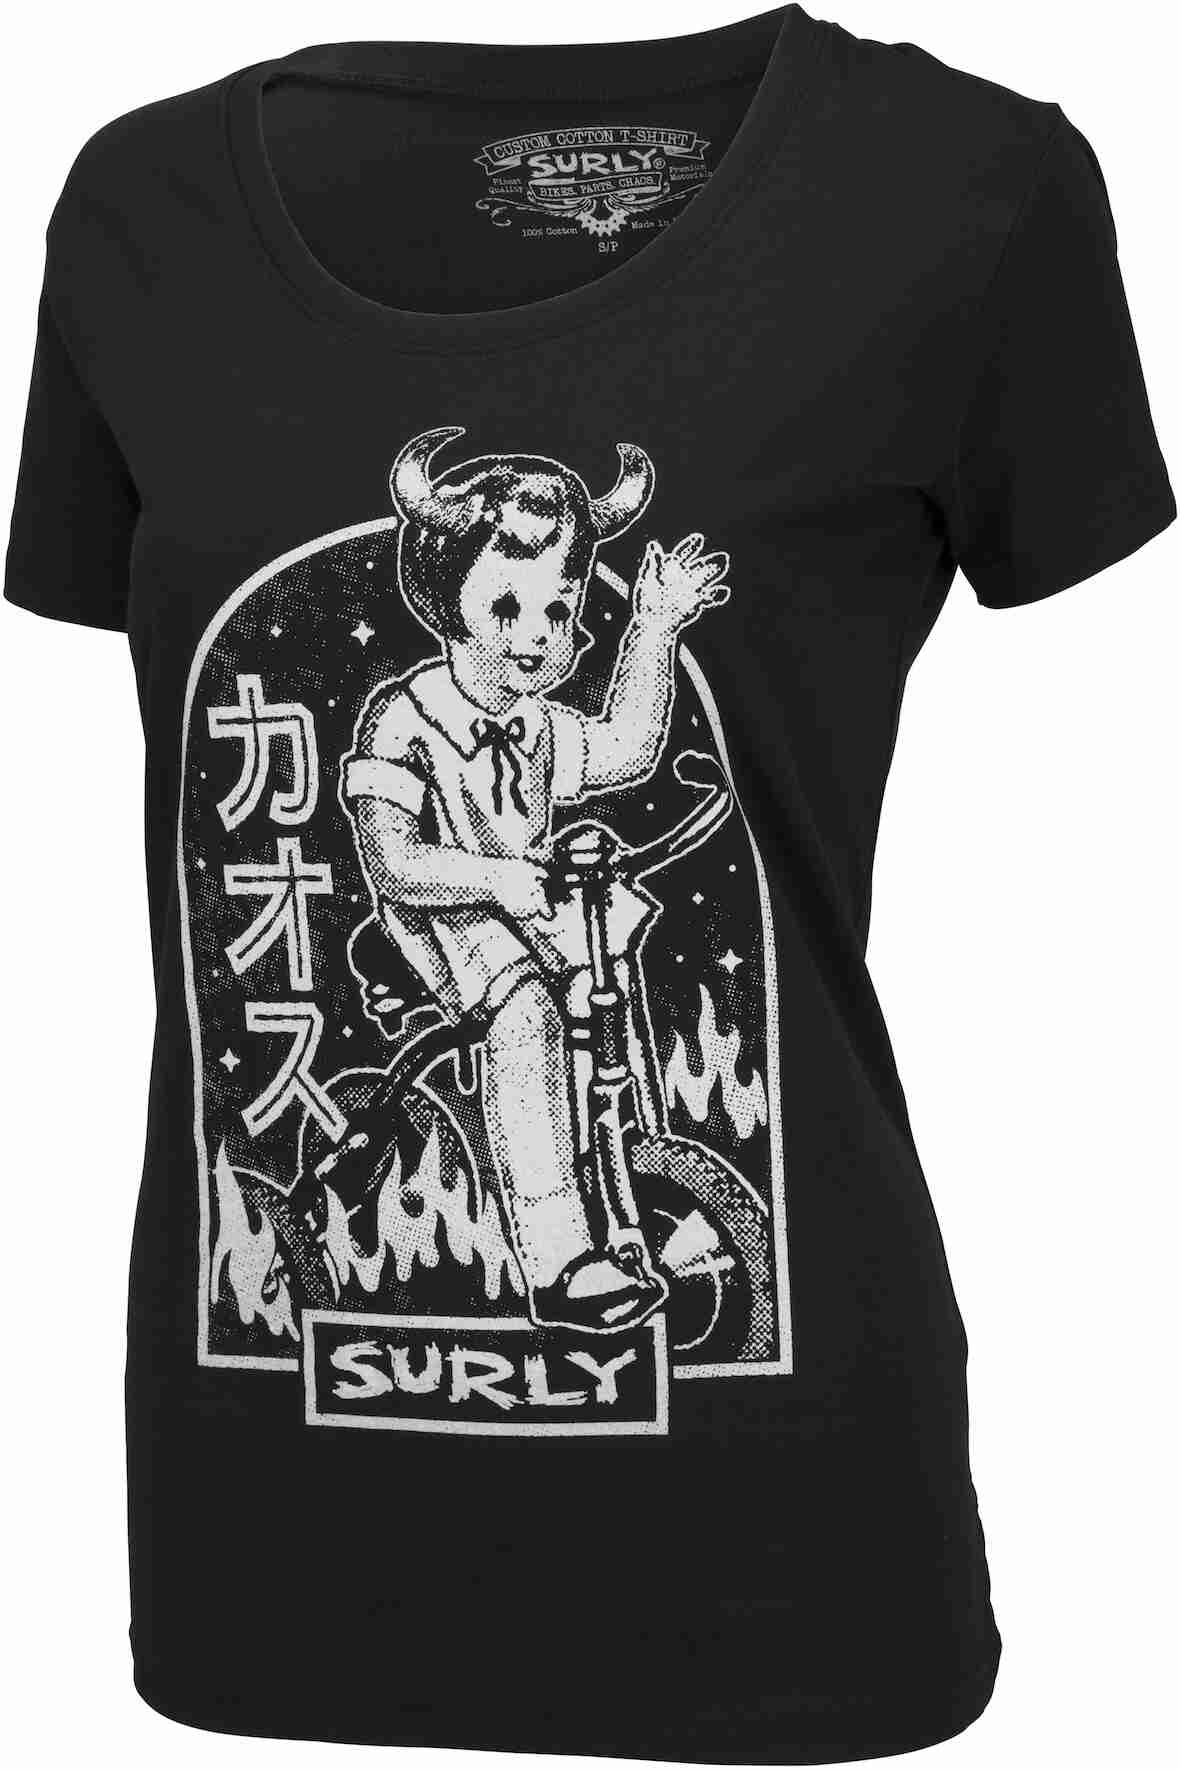 Surly Chaos women's t-shirt - black - front view